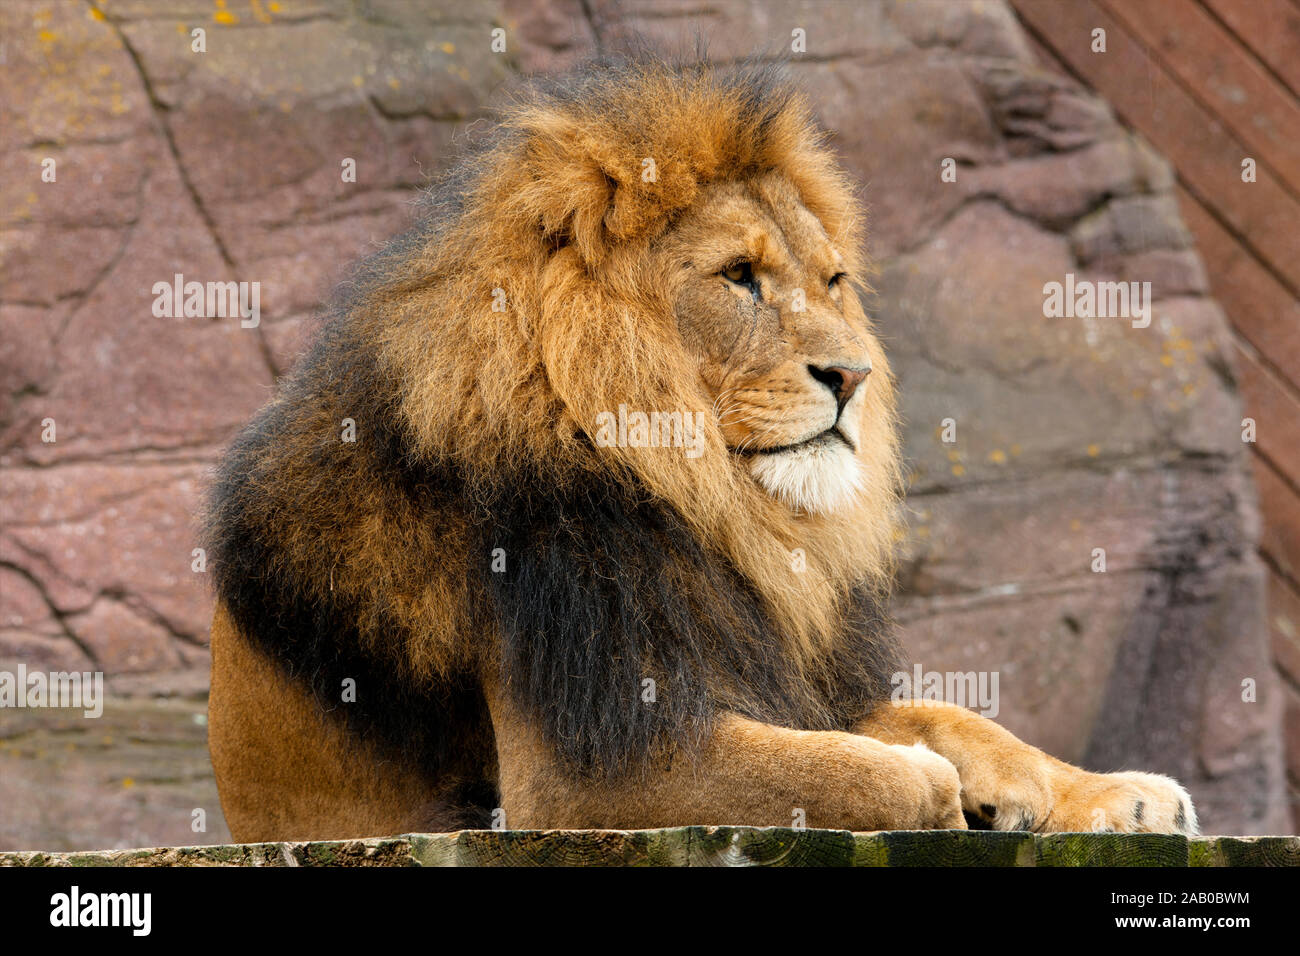 King, the aptly named Lion takes a break to size up tasty looking visitors near his enclosure. Stock Photo